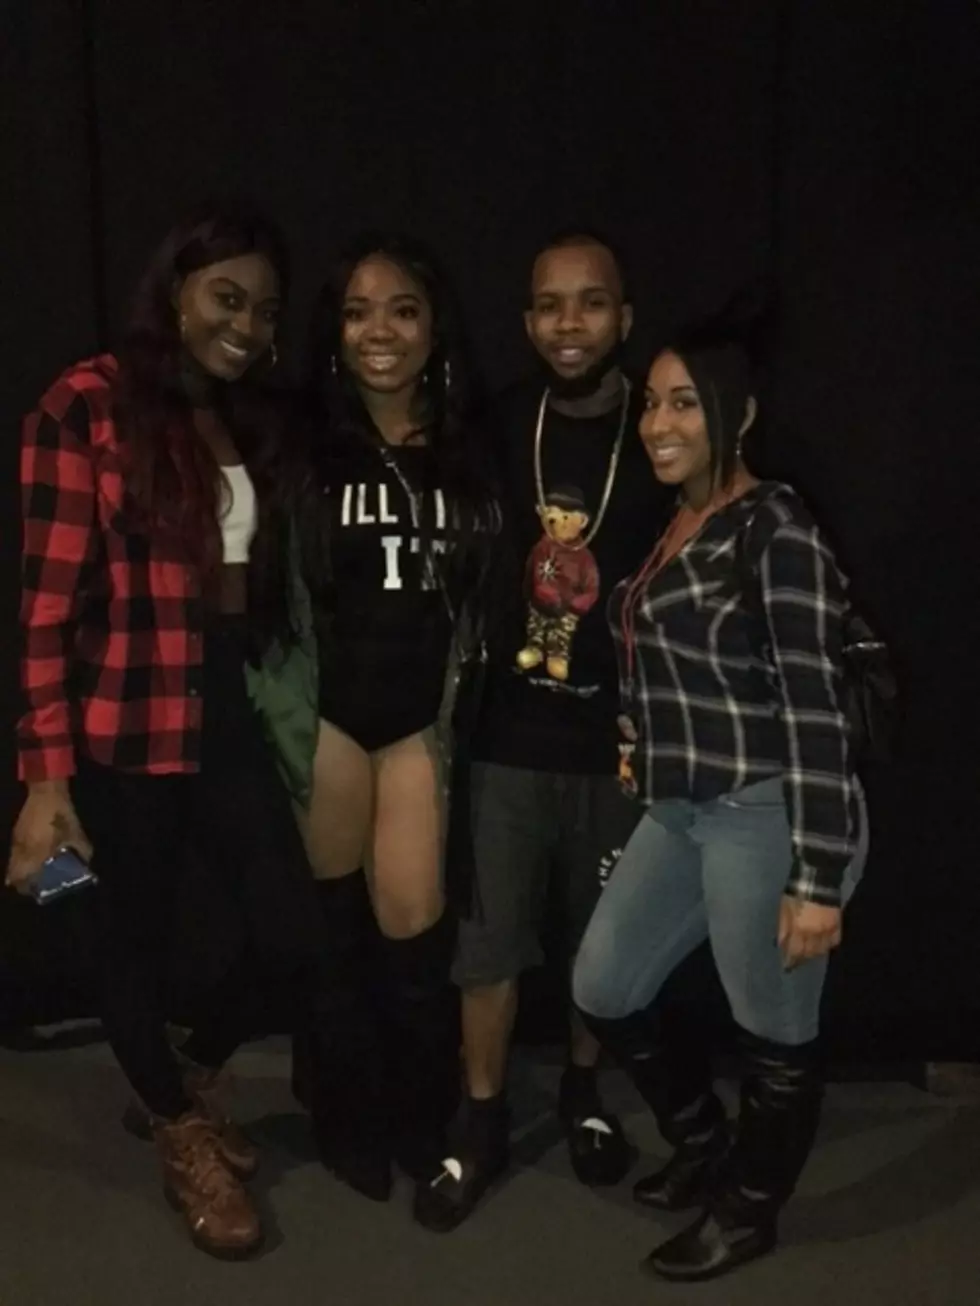 Tory Lanez at the Upstate Concert Hall